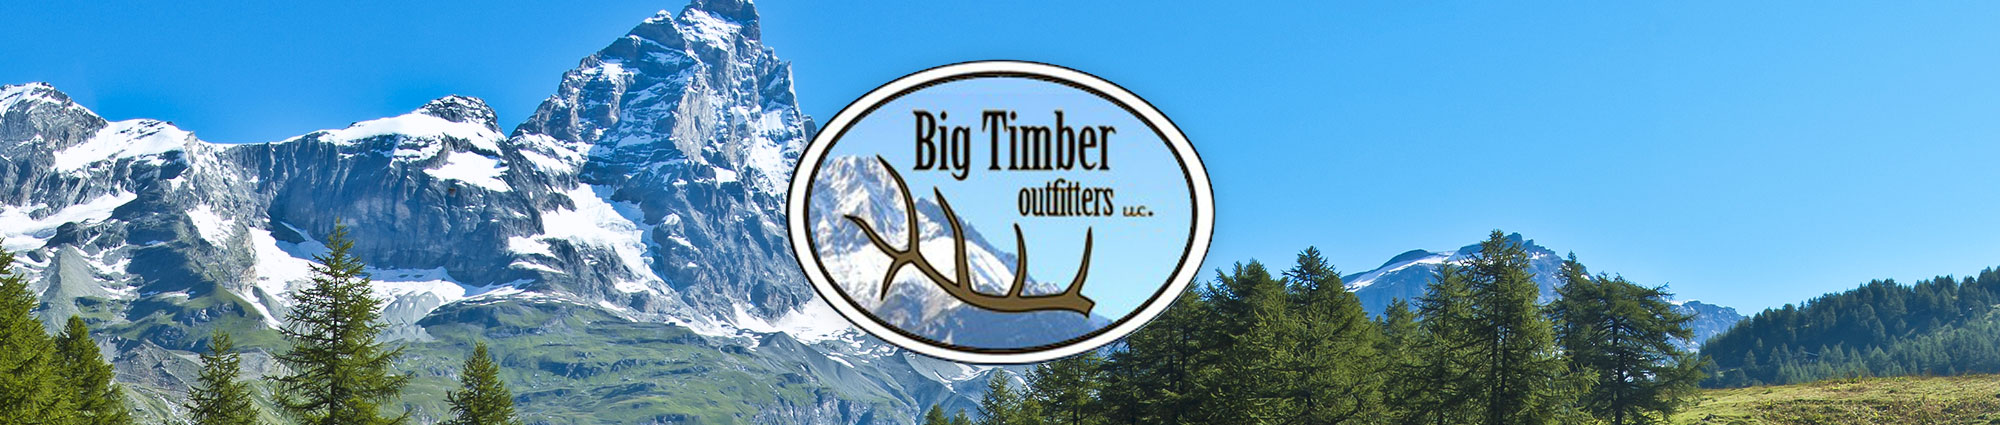 Big Timber Outfitters LLC